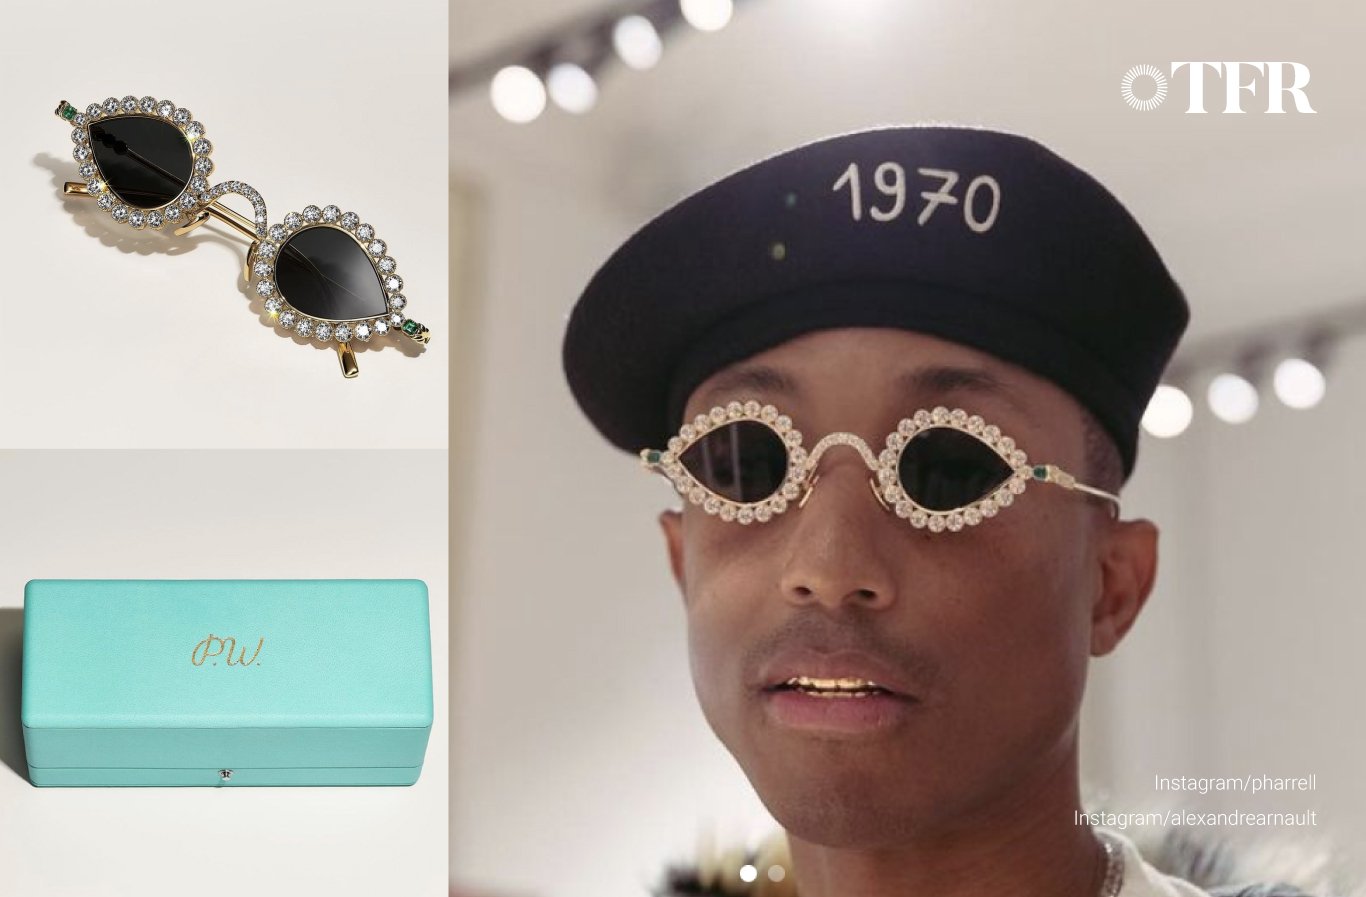 Tiffany & Co and Pharrell Williams' collab plagued with plagiarism  accusations — TFR